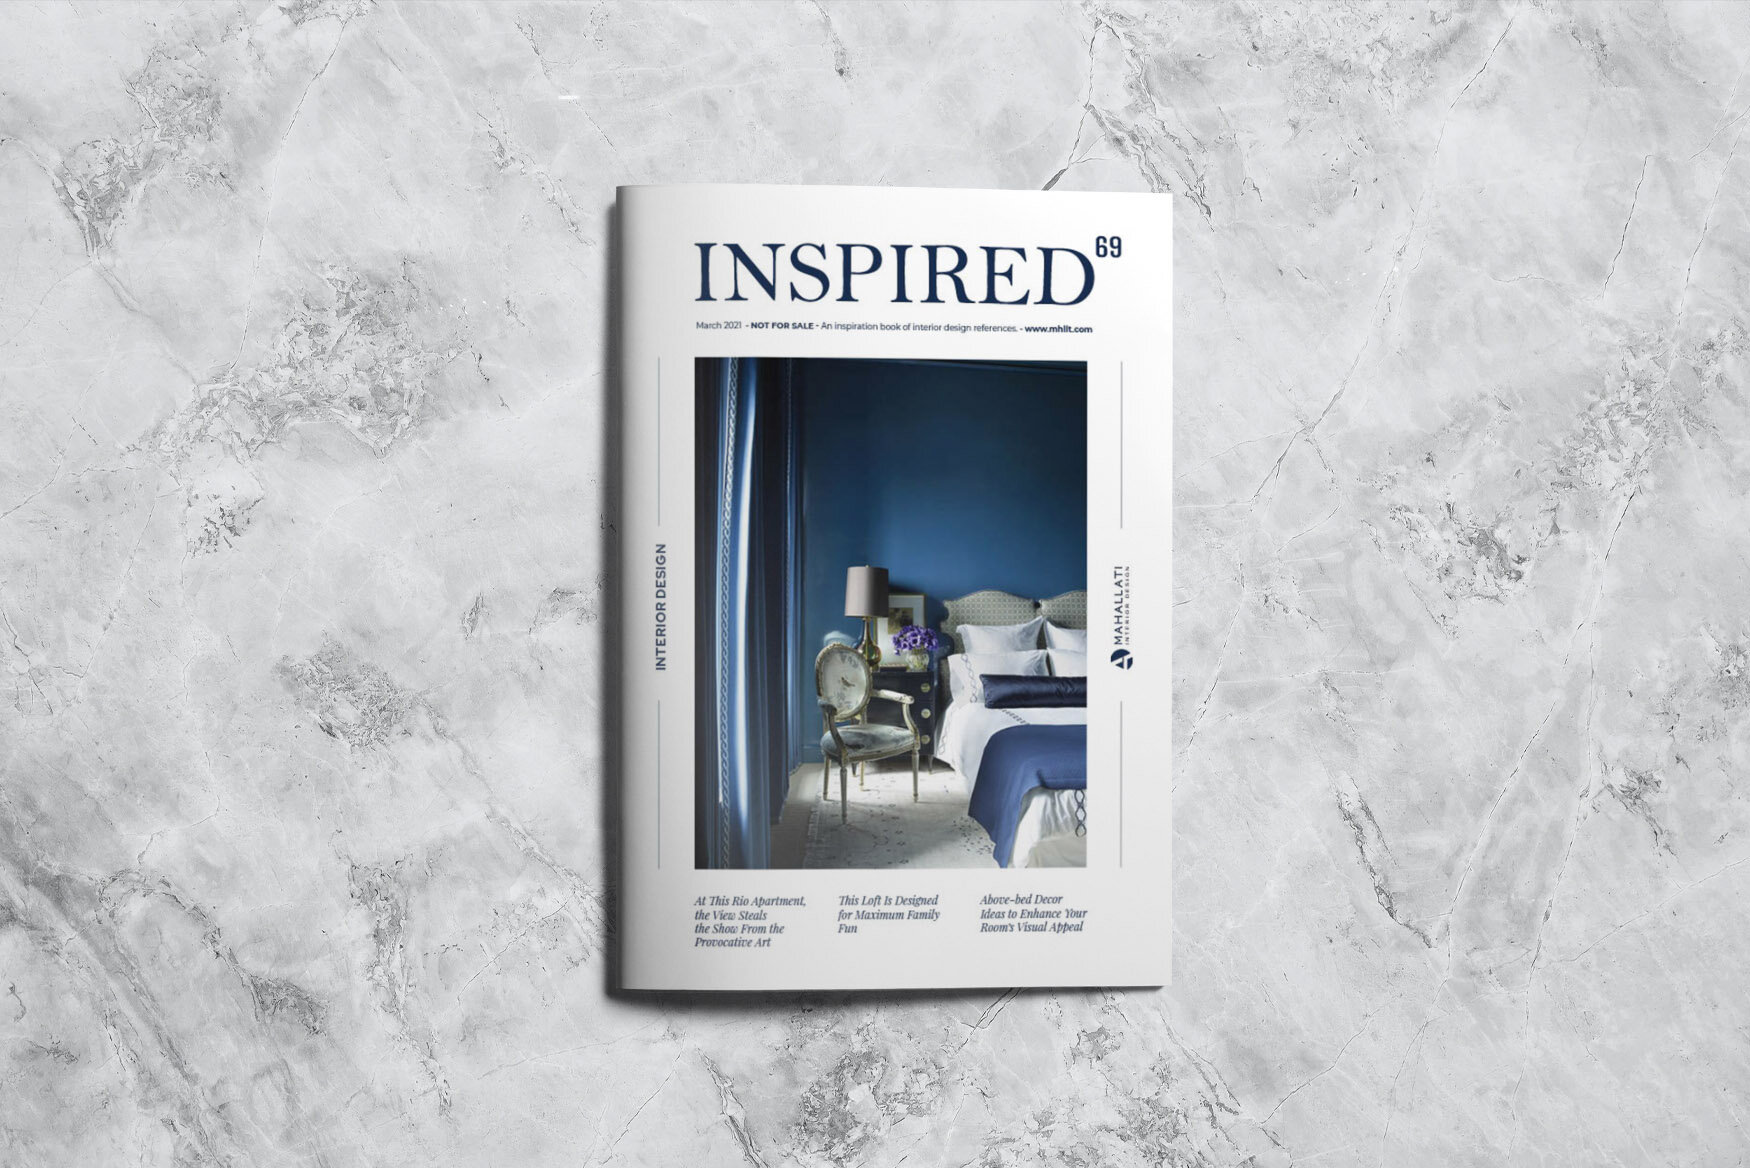 Inspired Vol 69 - March 2021